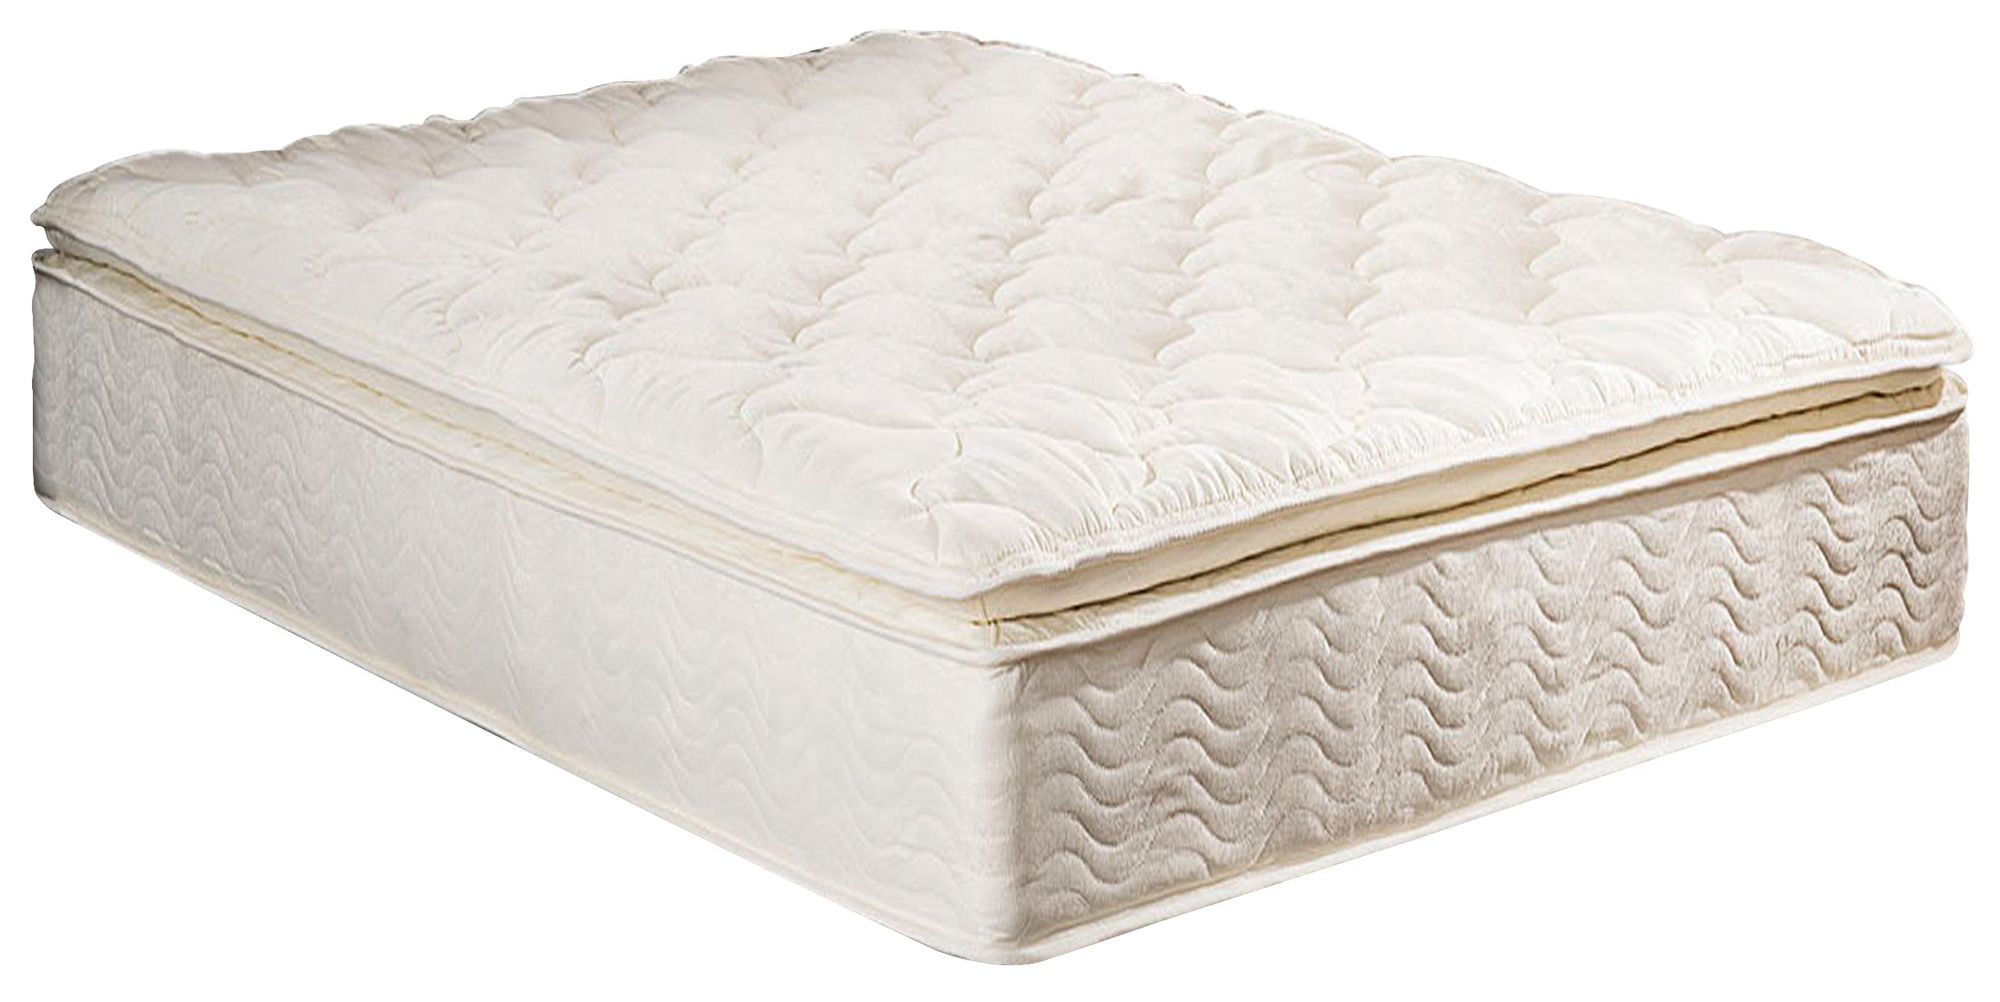 Between Firm vs Plush Mattress, which one is better for ...